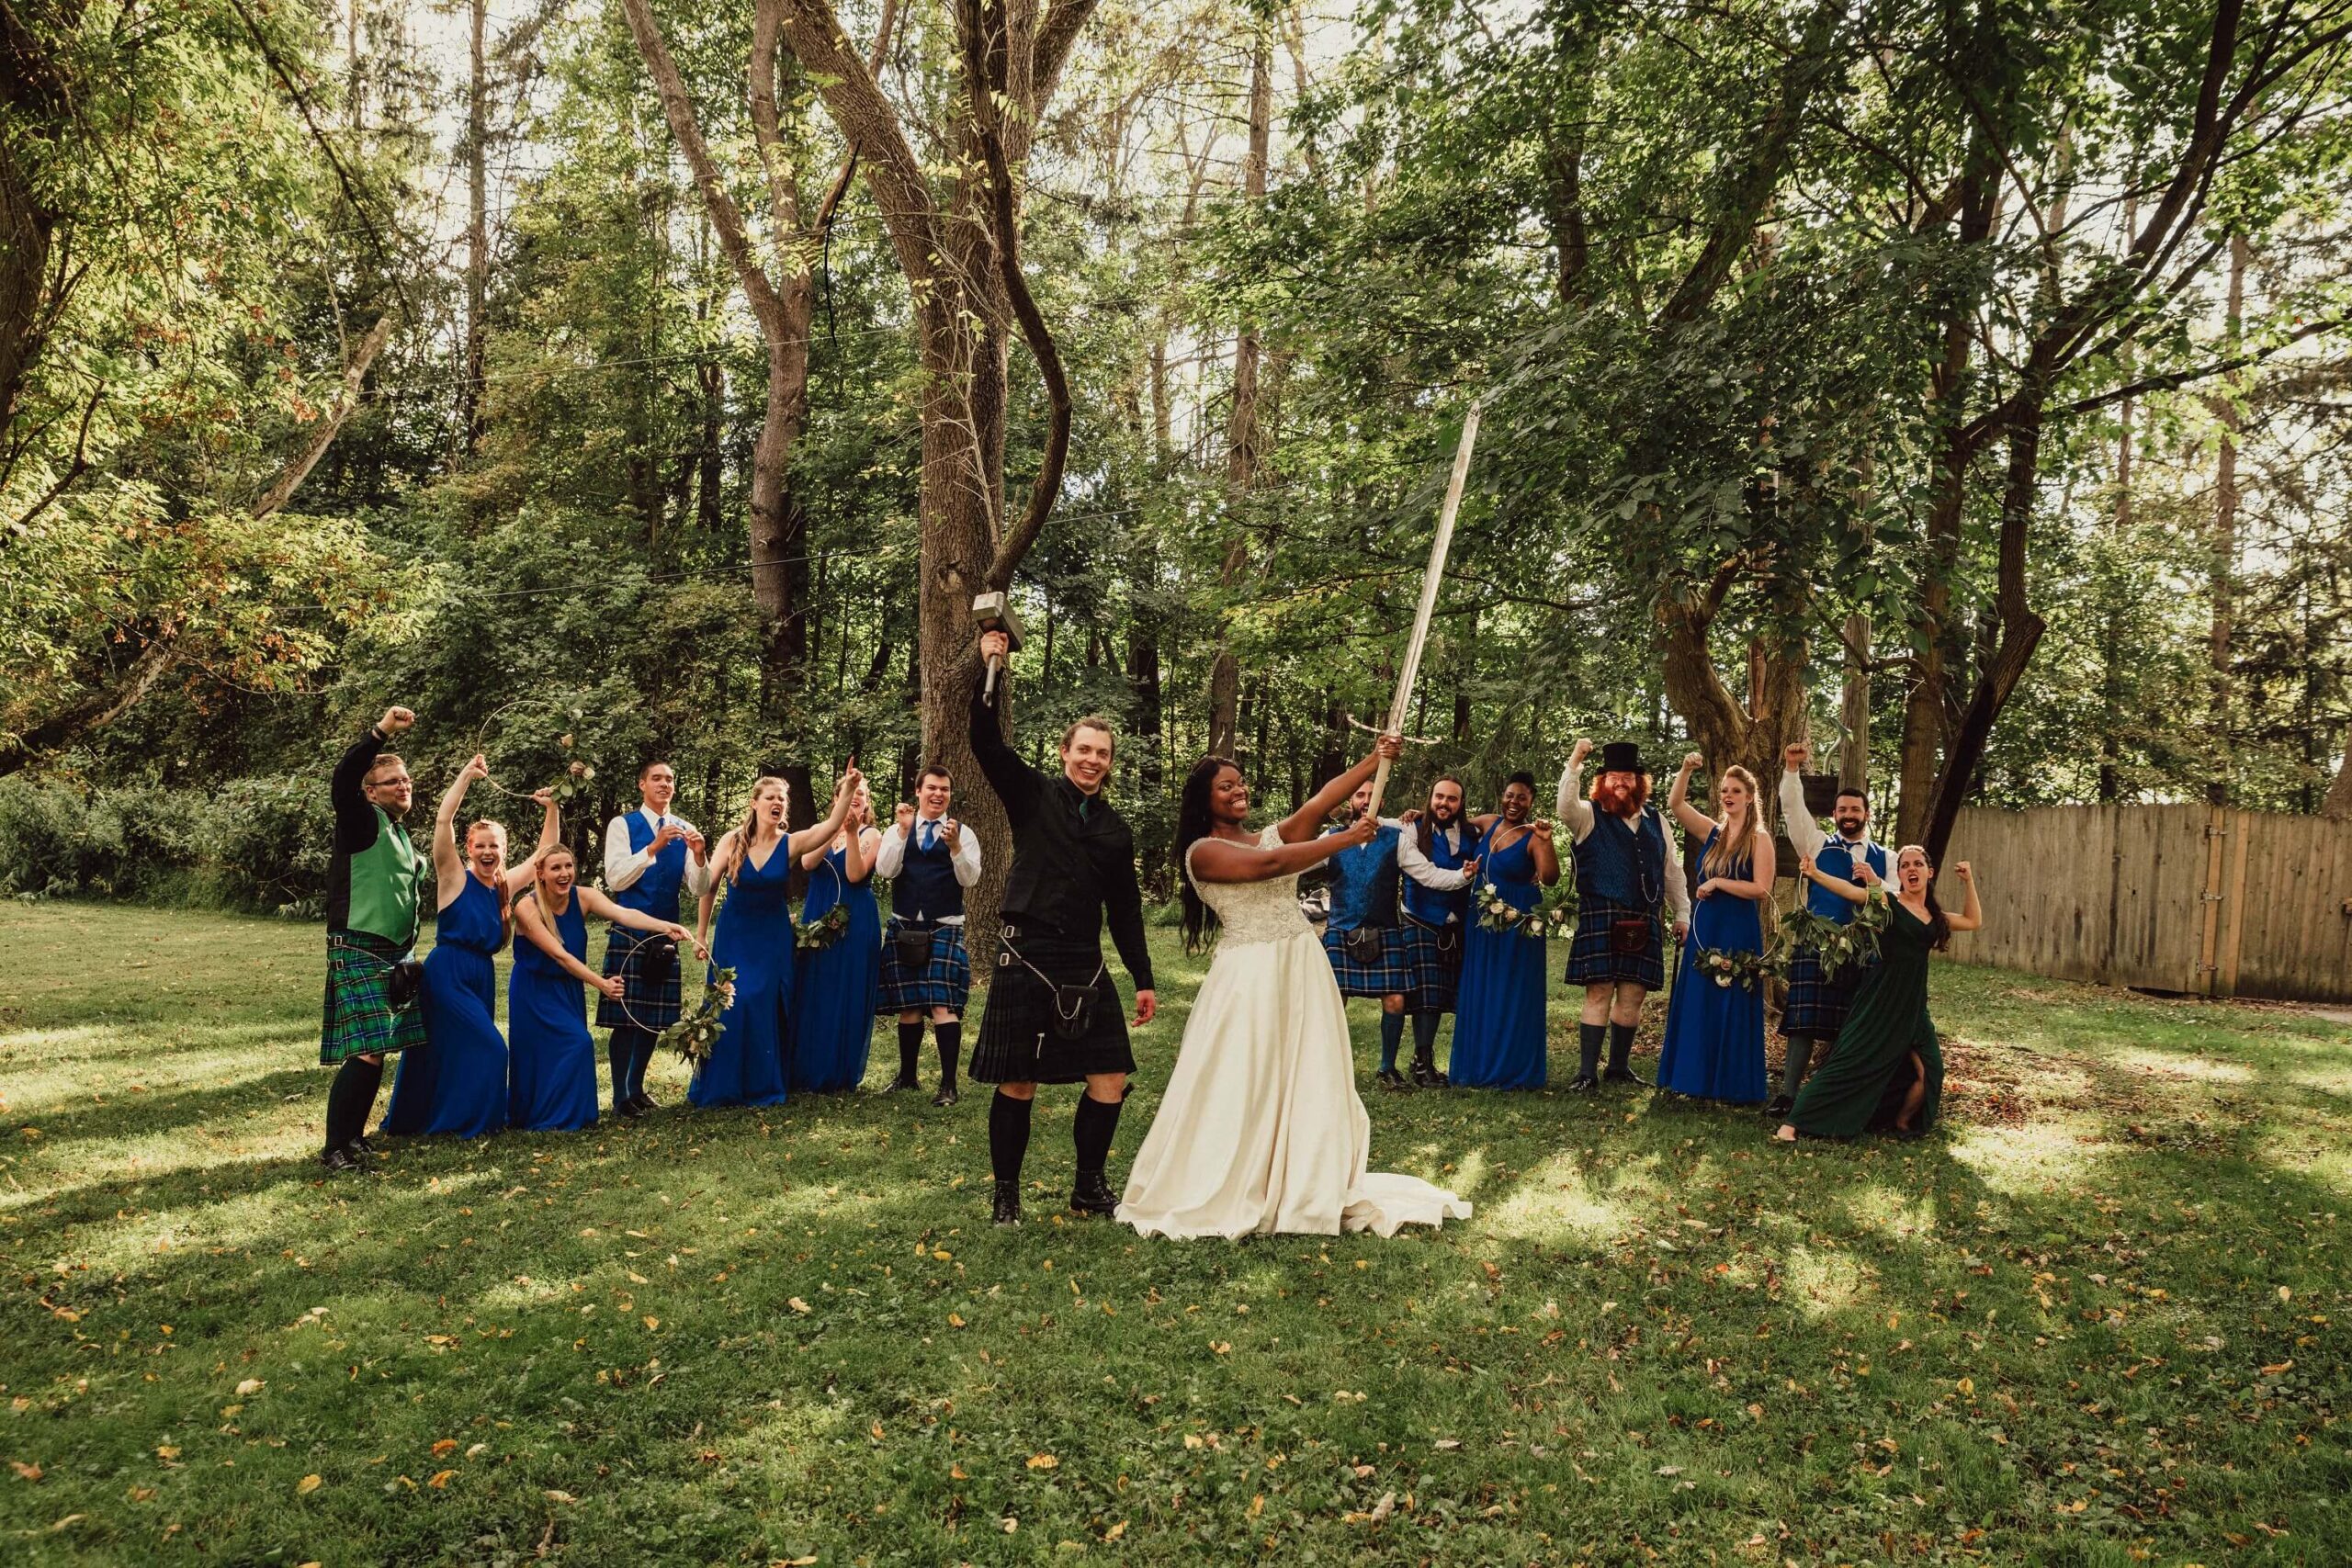 Wedding party celebrates marriage of friends with swords, hammers and good vibes at Renaissance Festival.